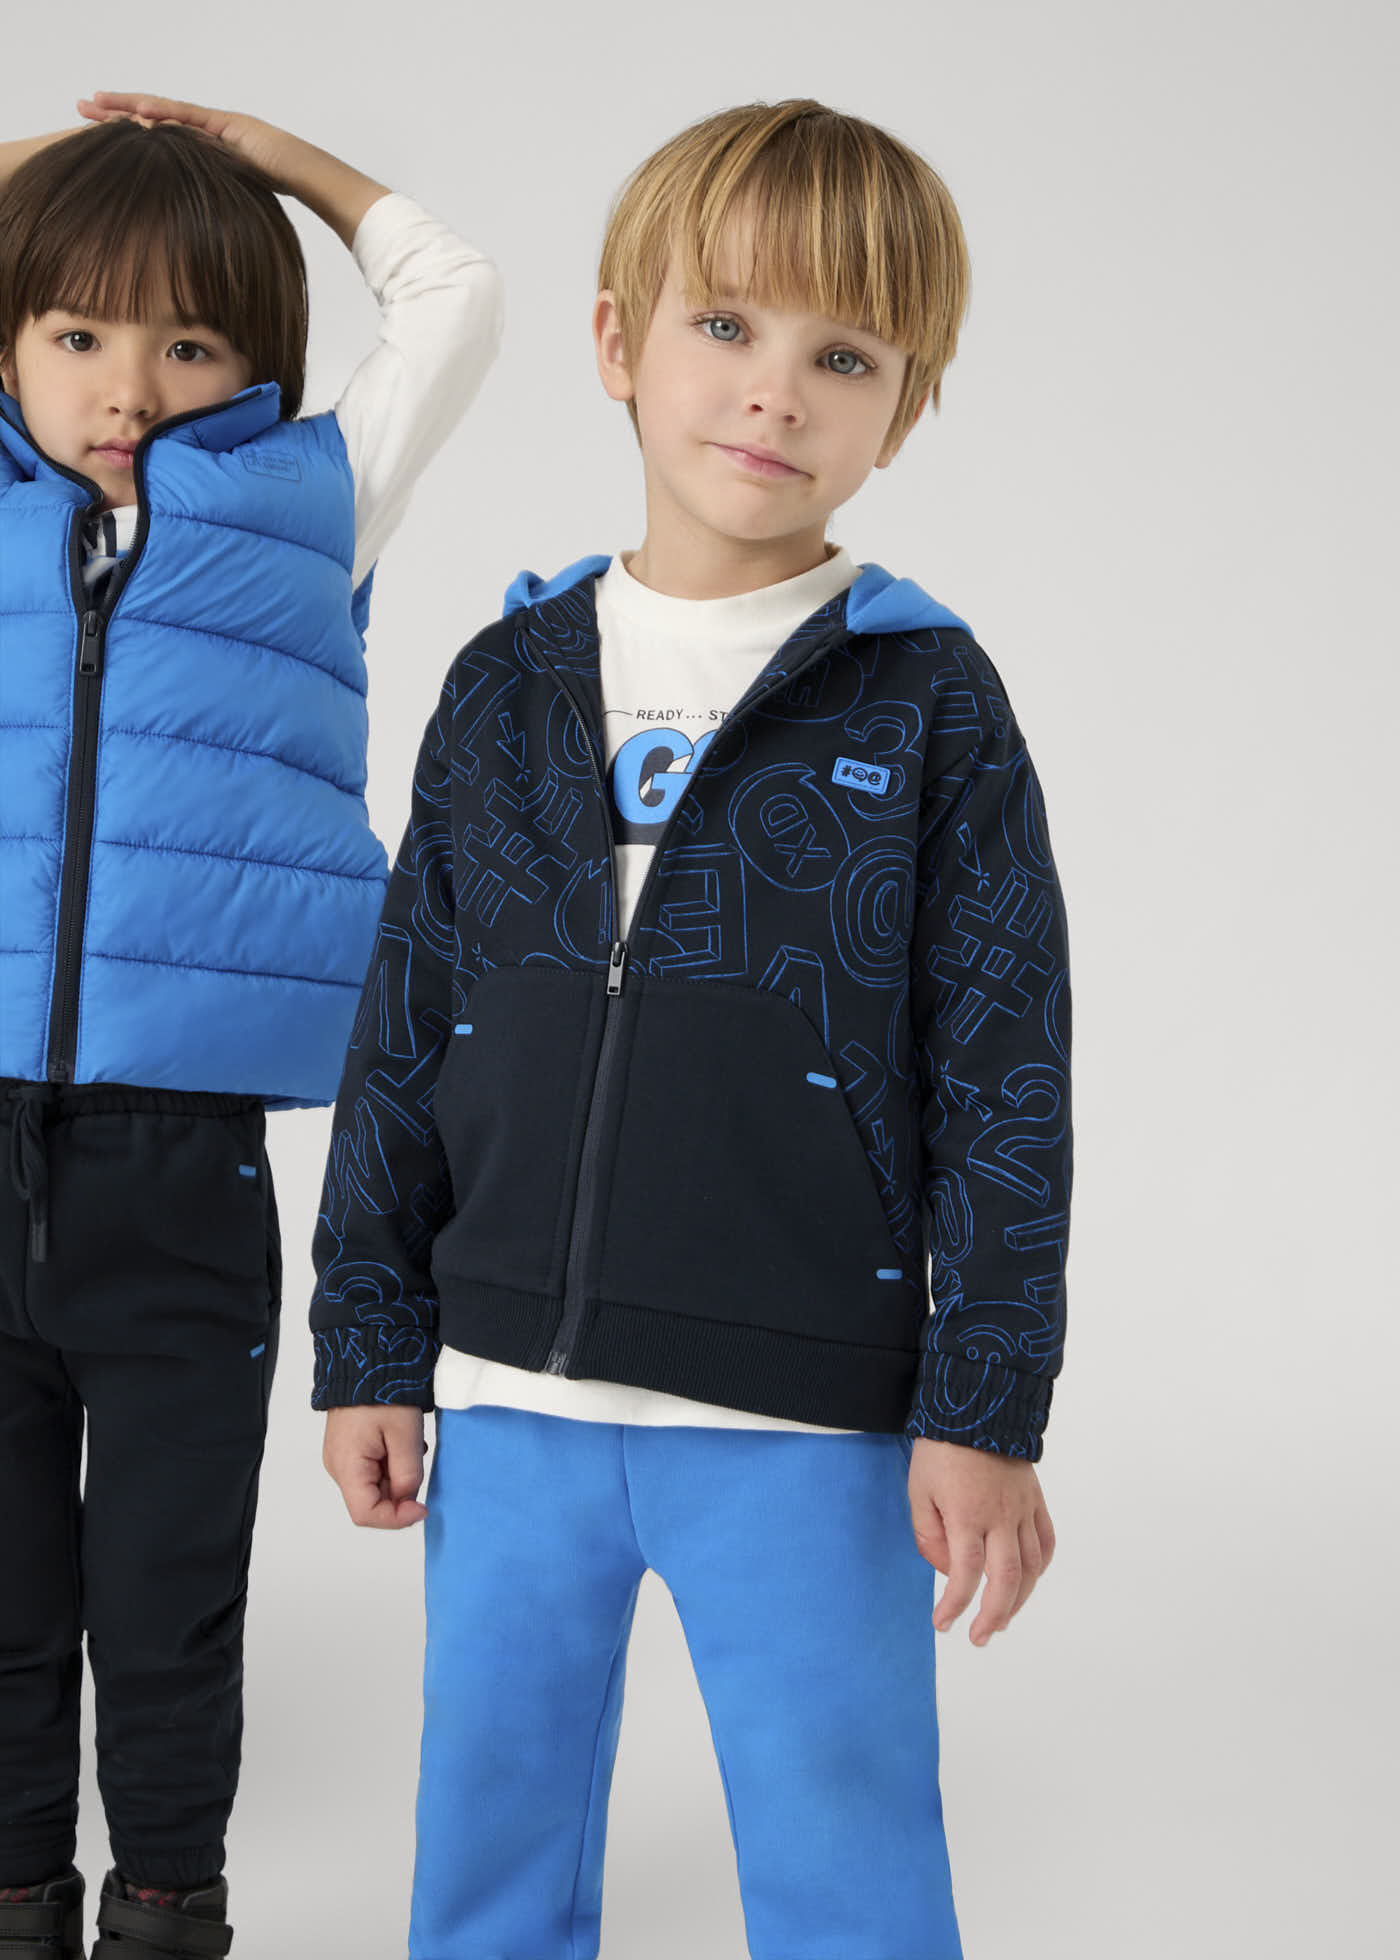 Tracksuit with sport t-shirt for boys